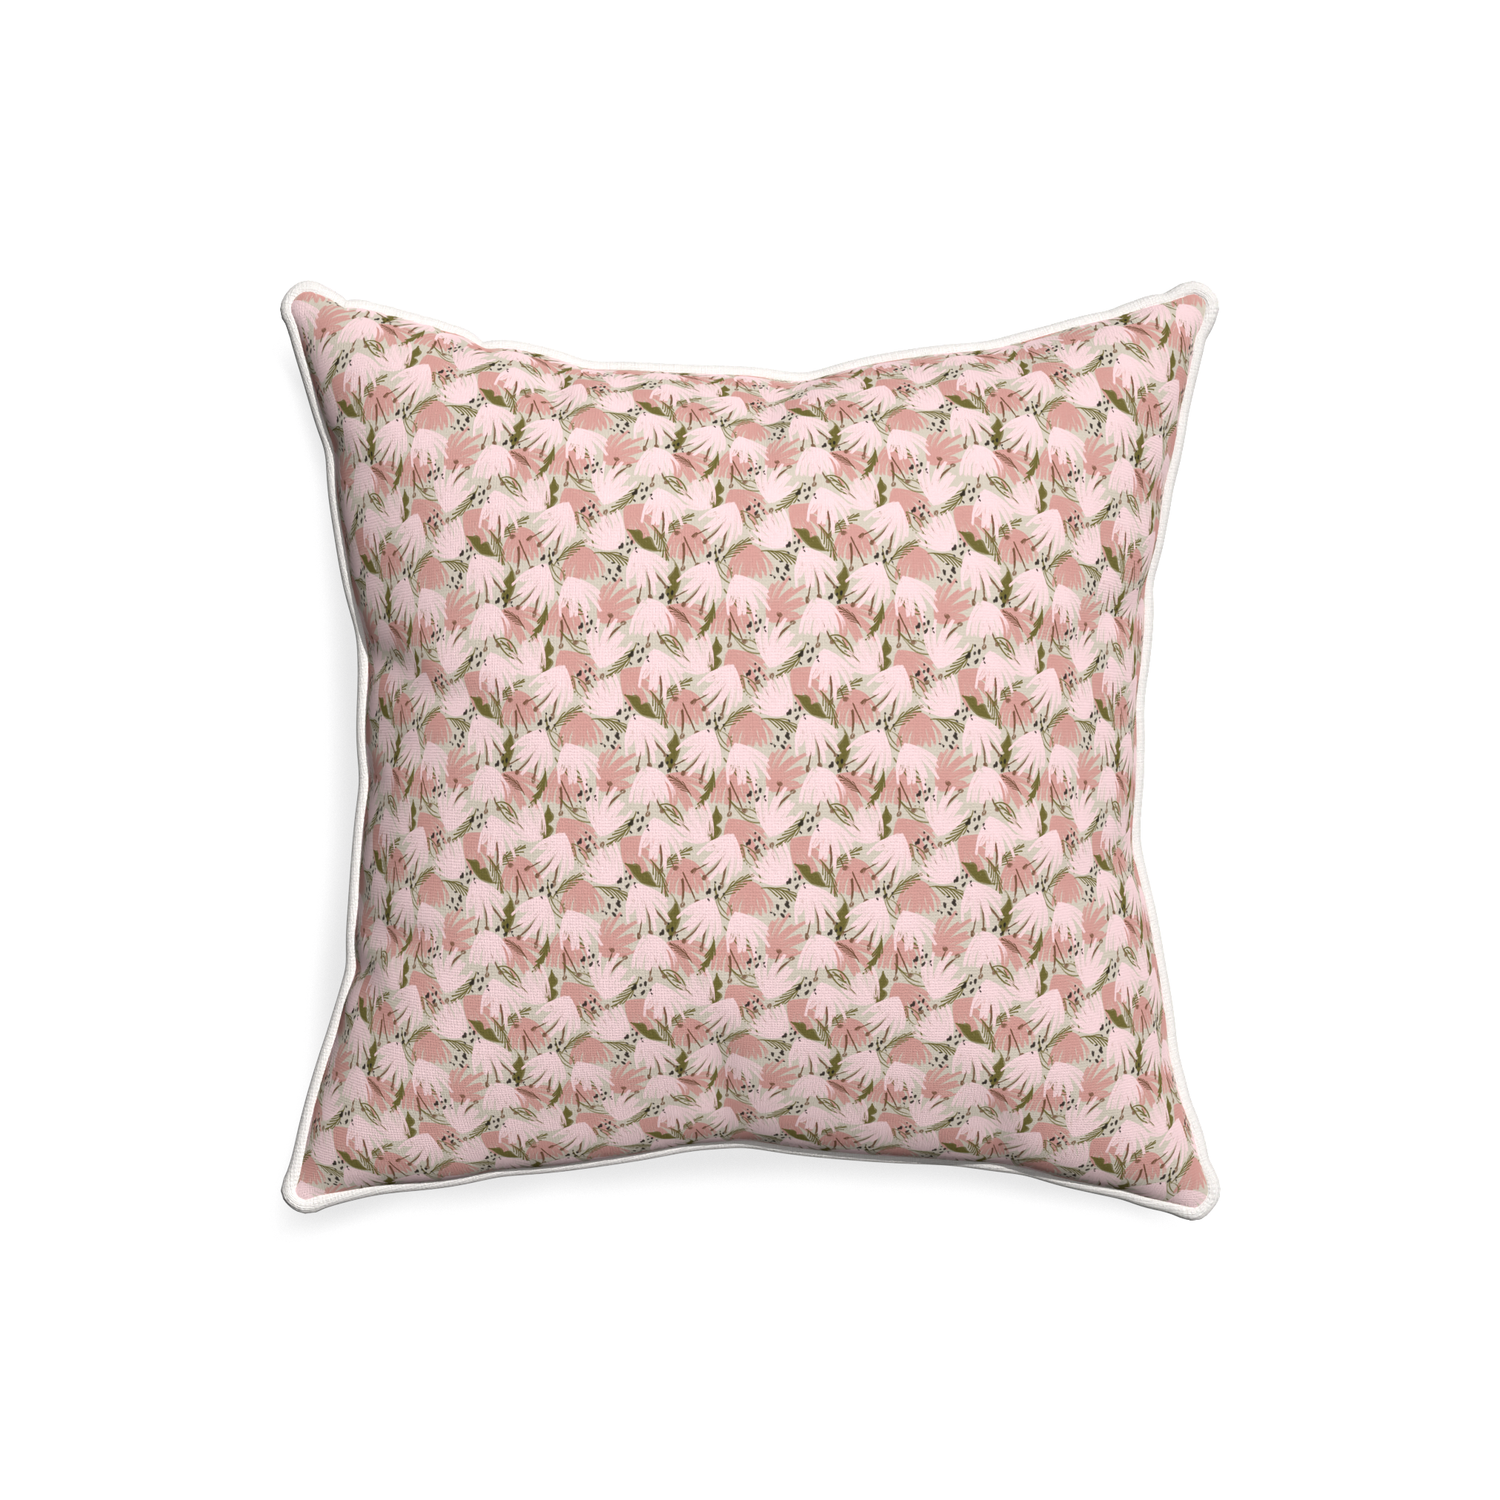 20-square eden pink custom pillow with snow piping on white background